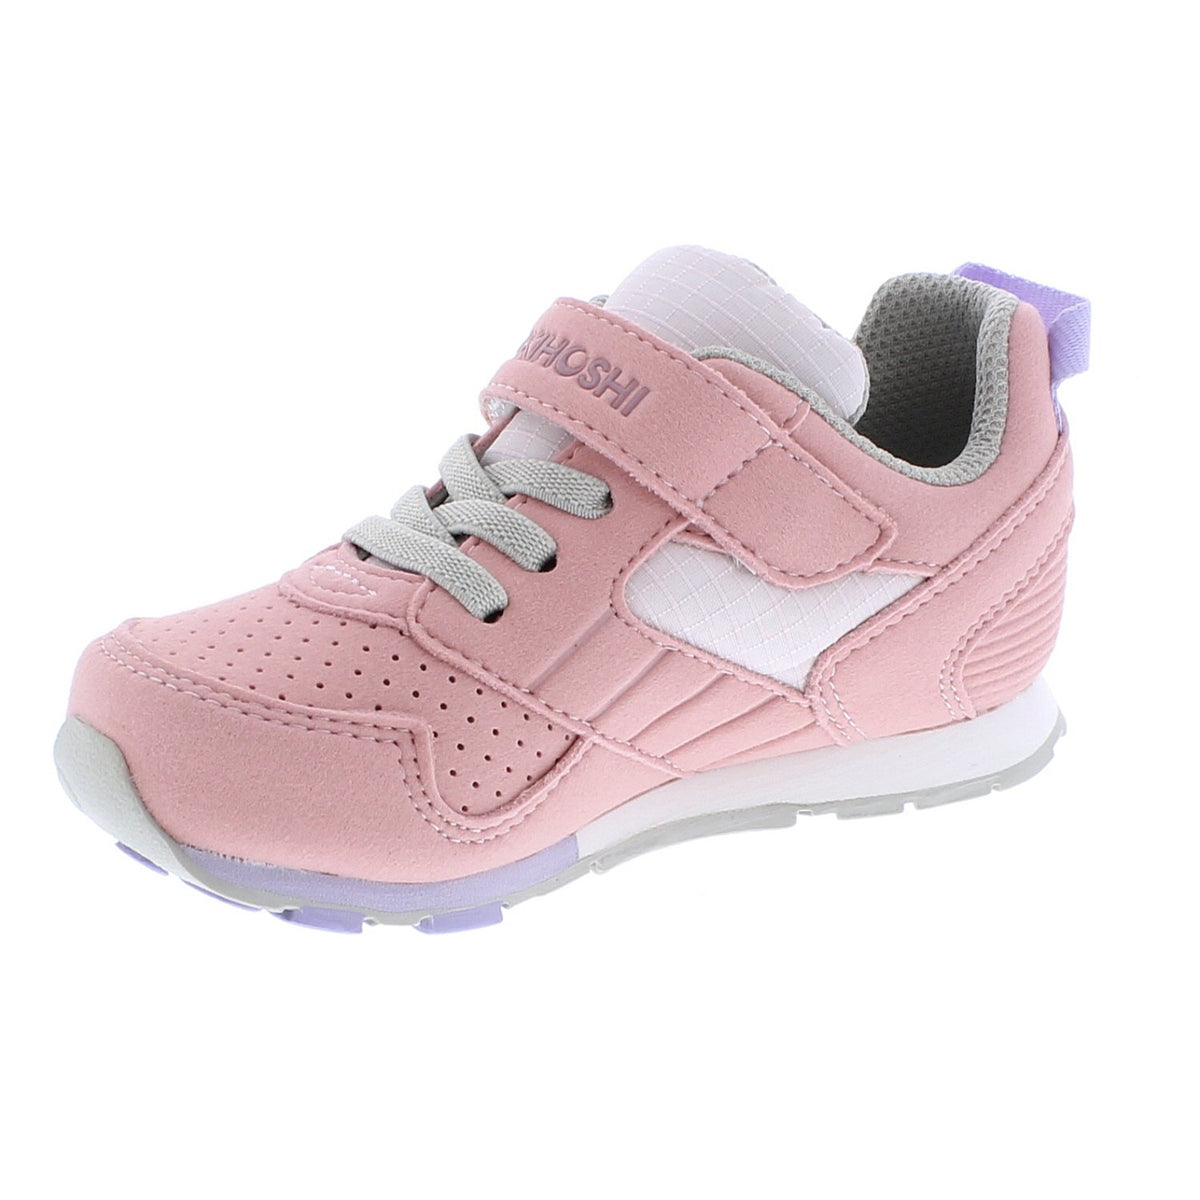 Childrens Tsukihoshi Racer Sneaker in Rose/Pink from the front view